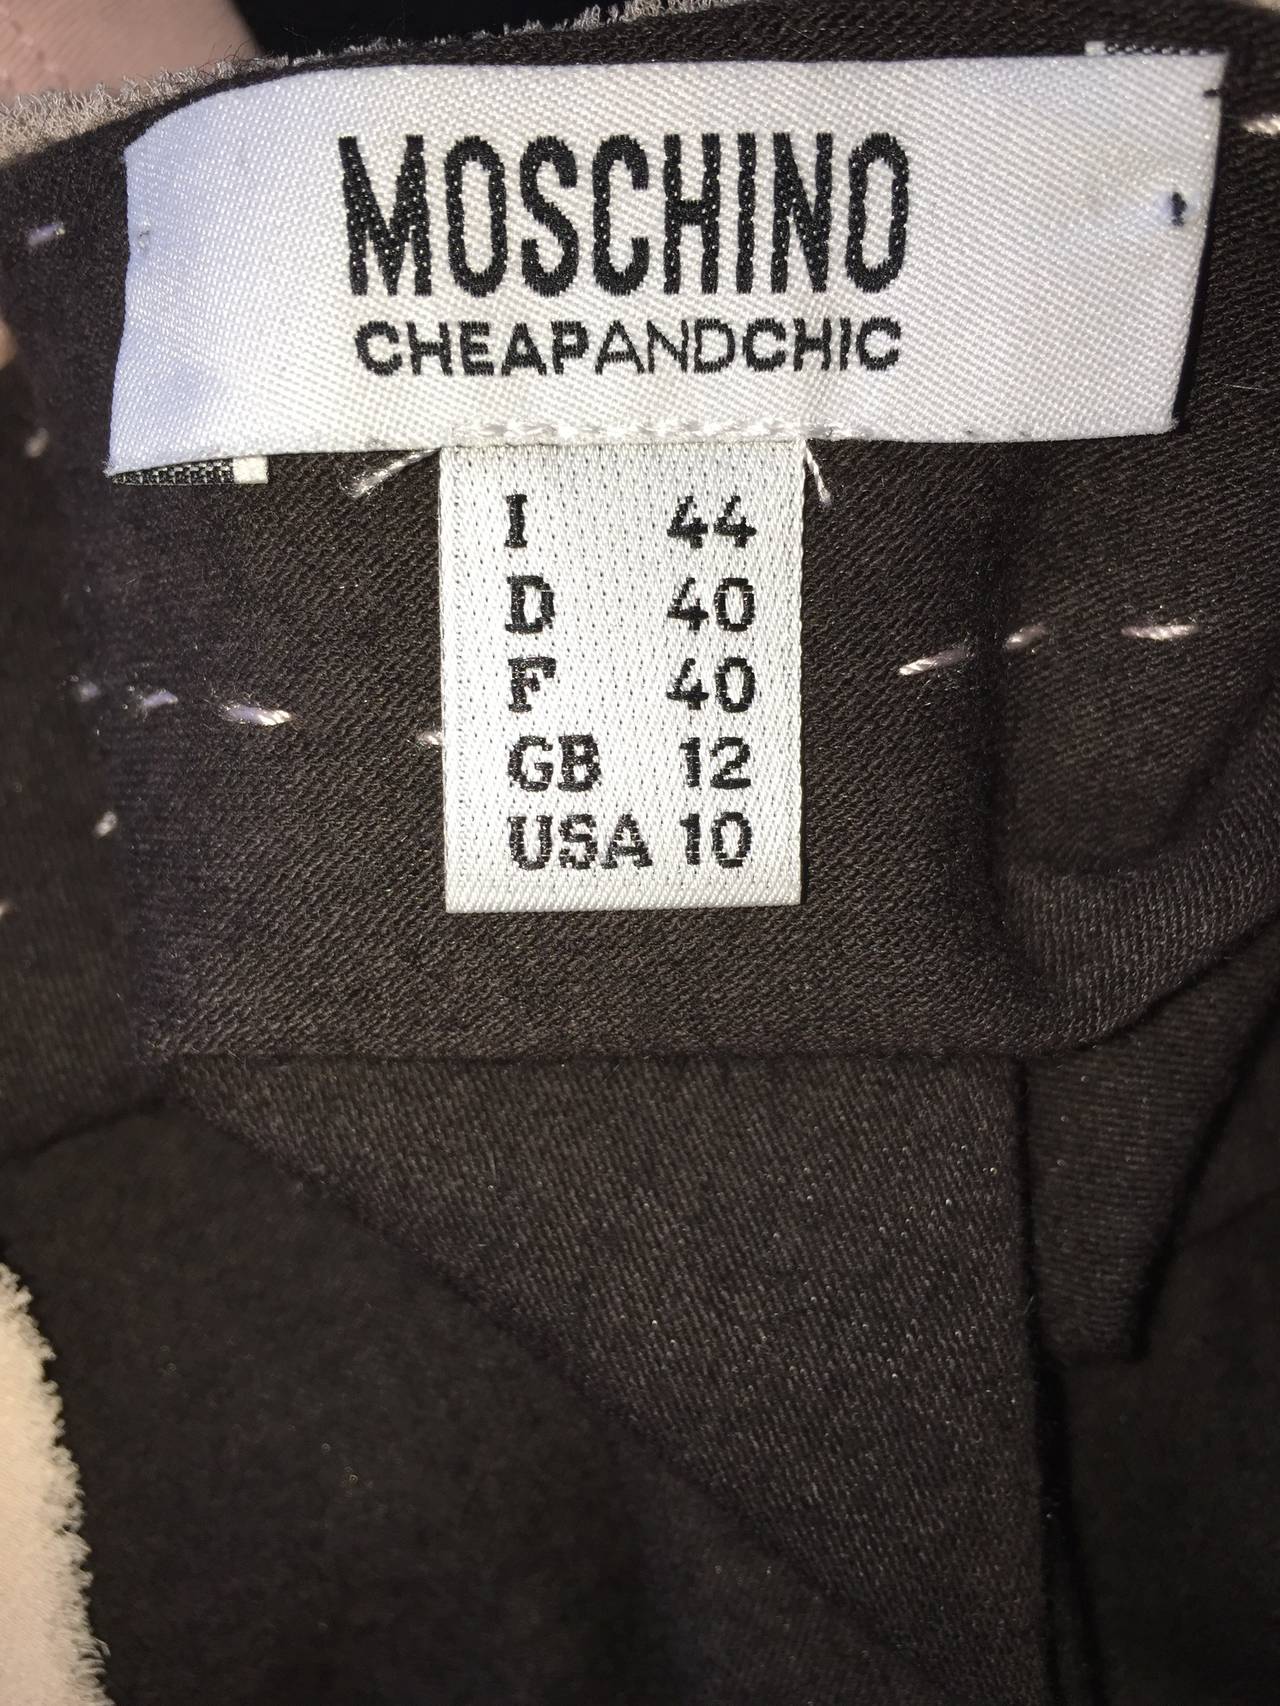 Moschino Cheap And Chic Brown + Pink Wool and Cotton Sweater Top w/ Bow ...